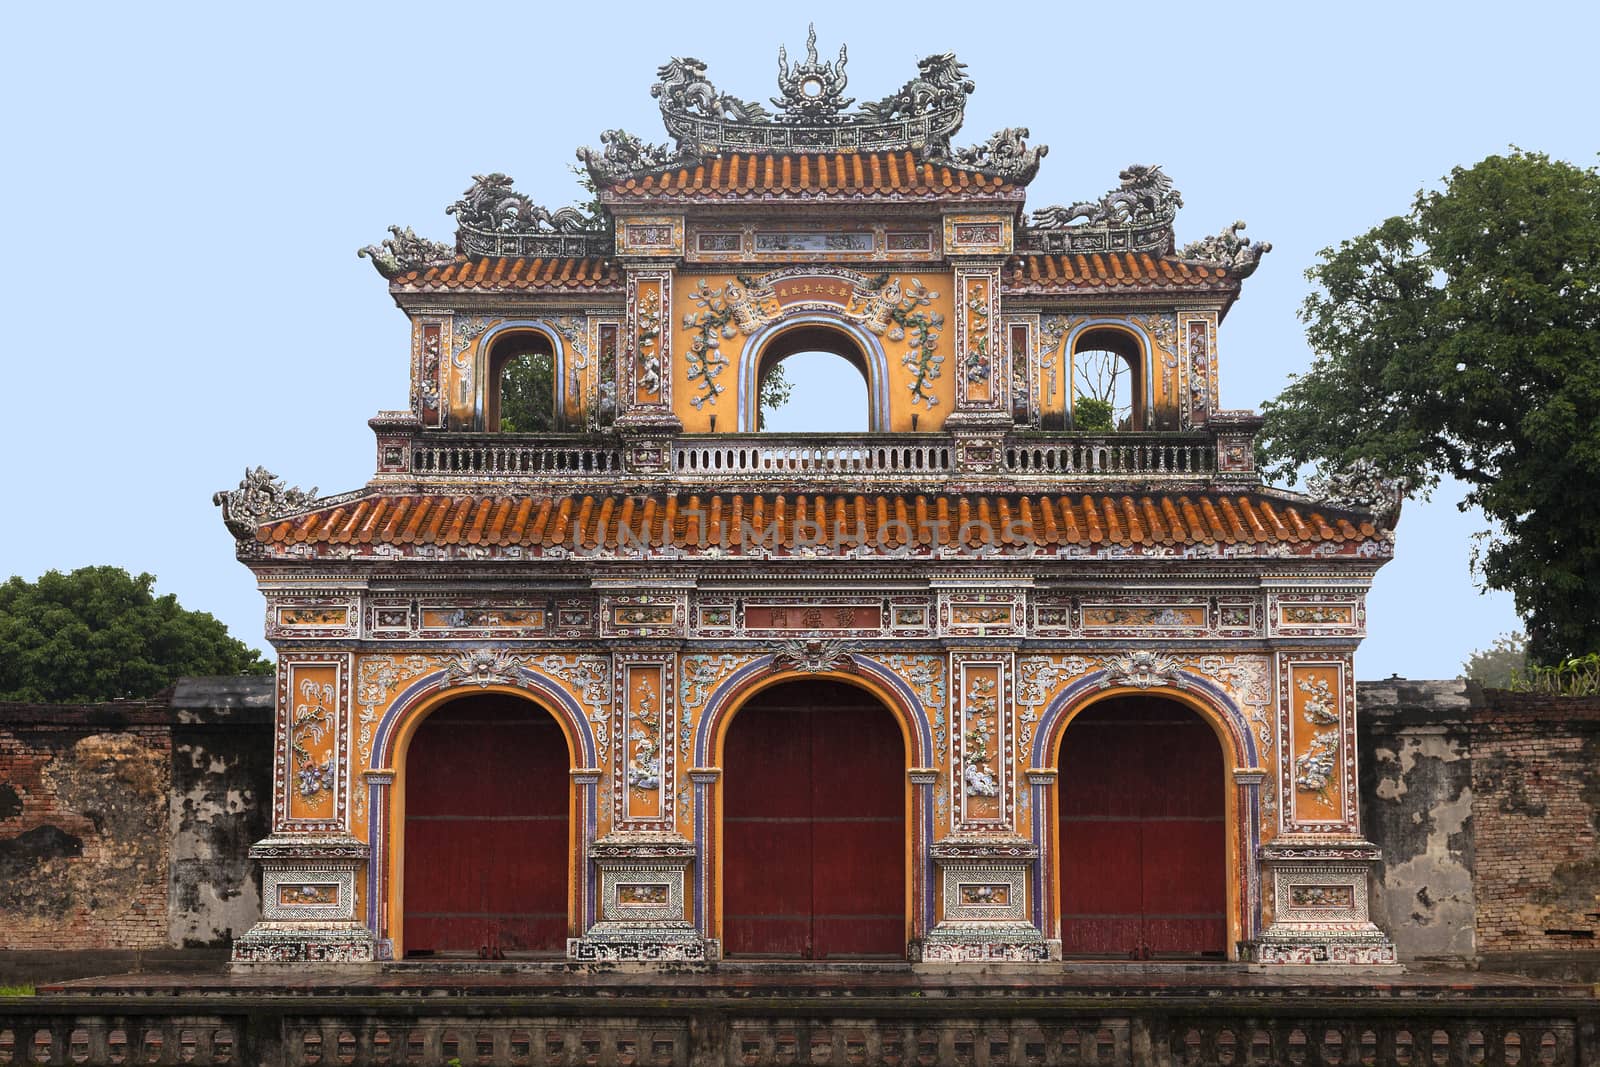 The East Gate to the Citadel of the Imperial City in Hue, Vietnam